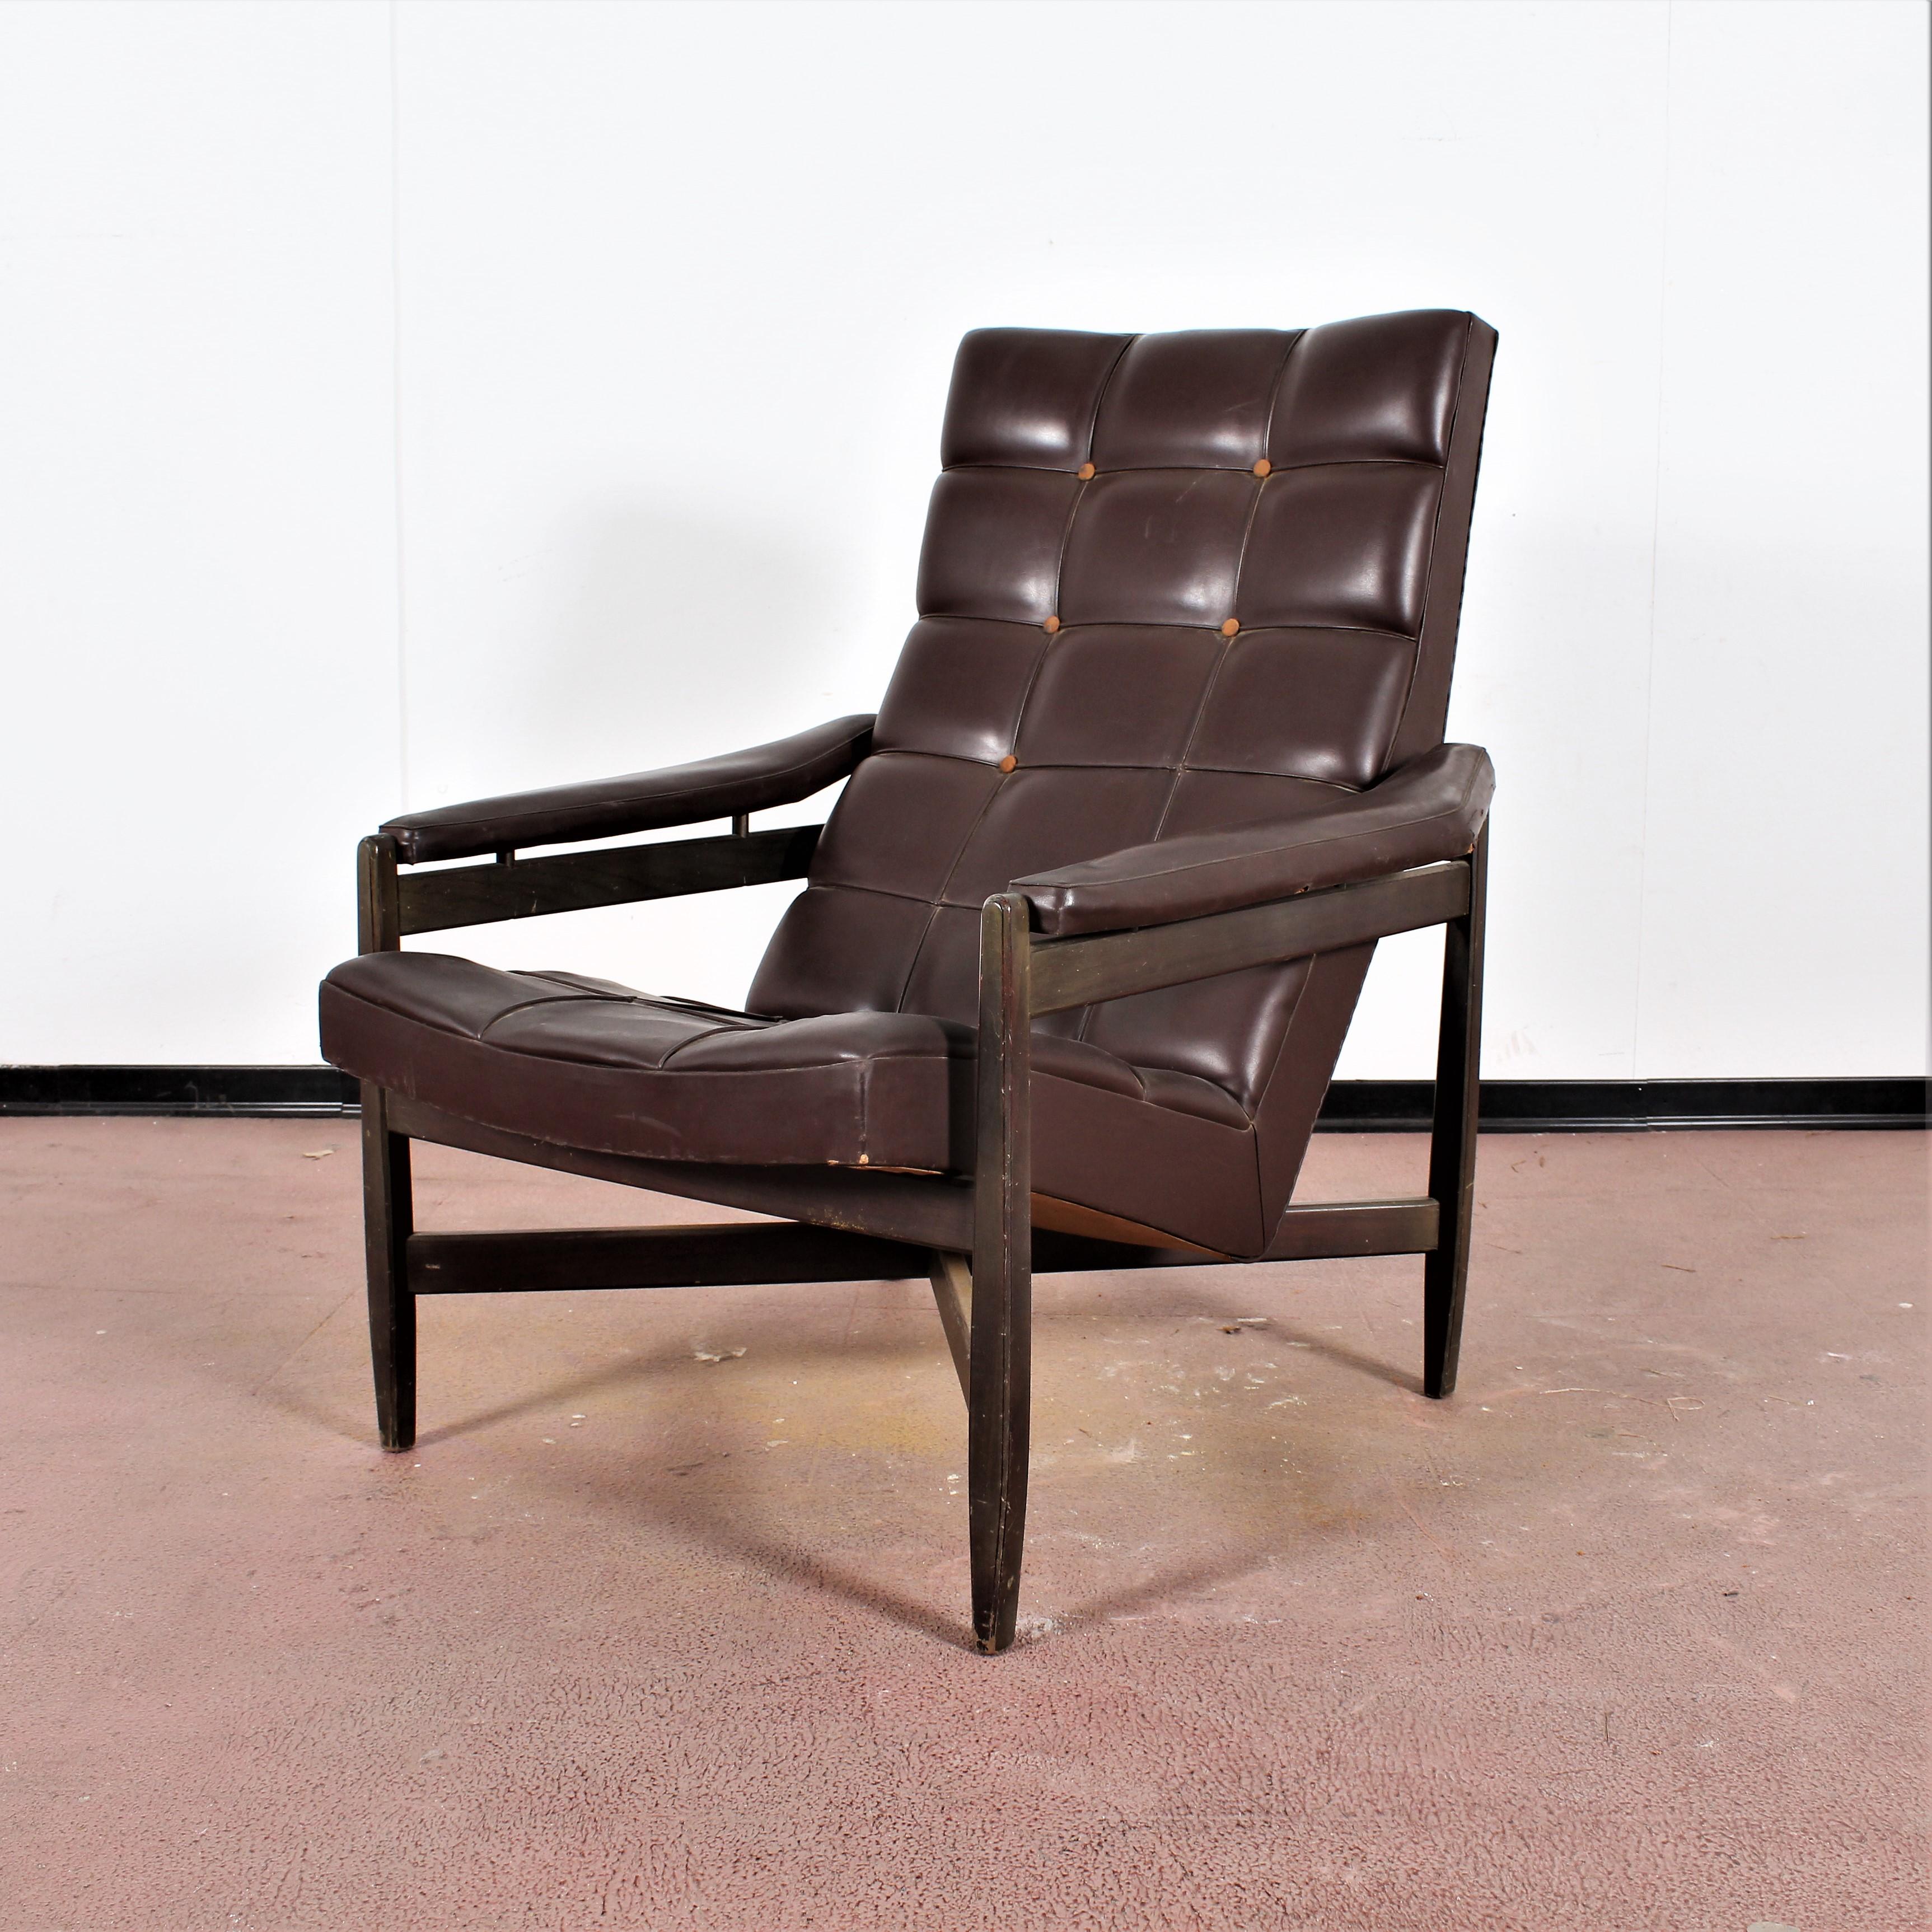 leather and wood chair with ottoman